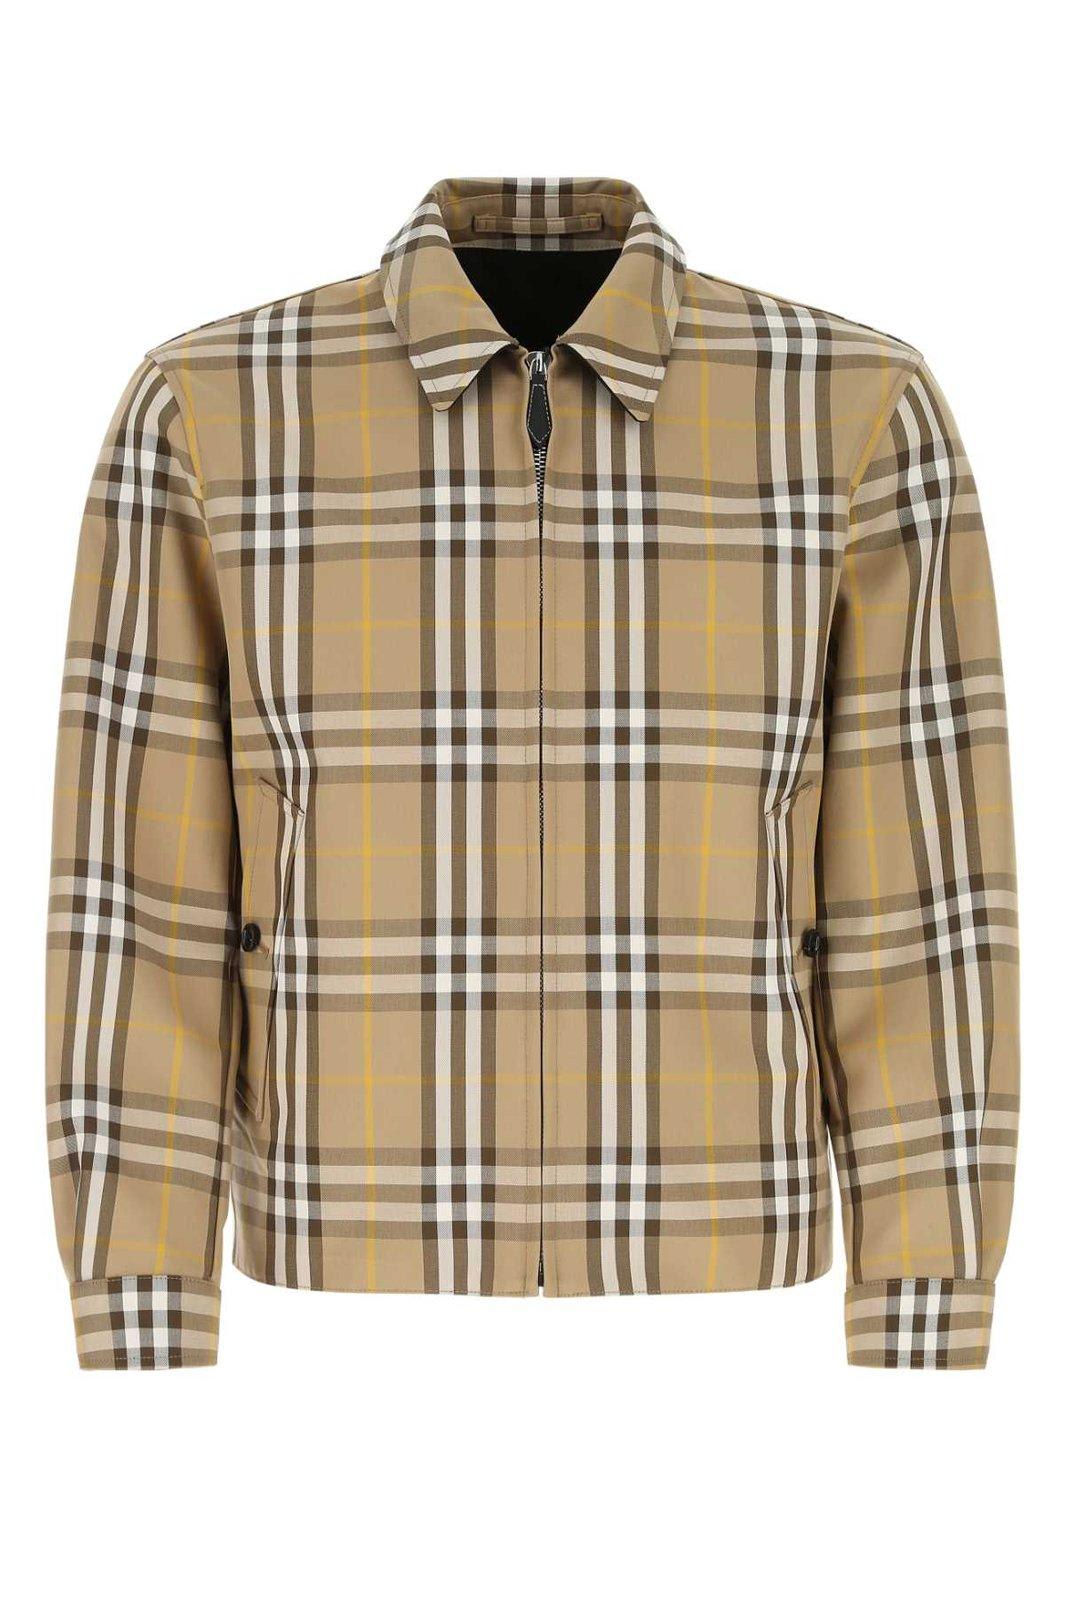 Burberry Checked Reversible Jacket